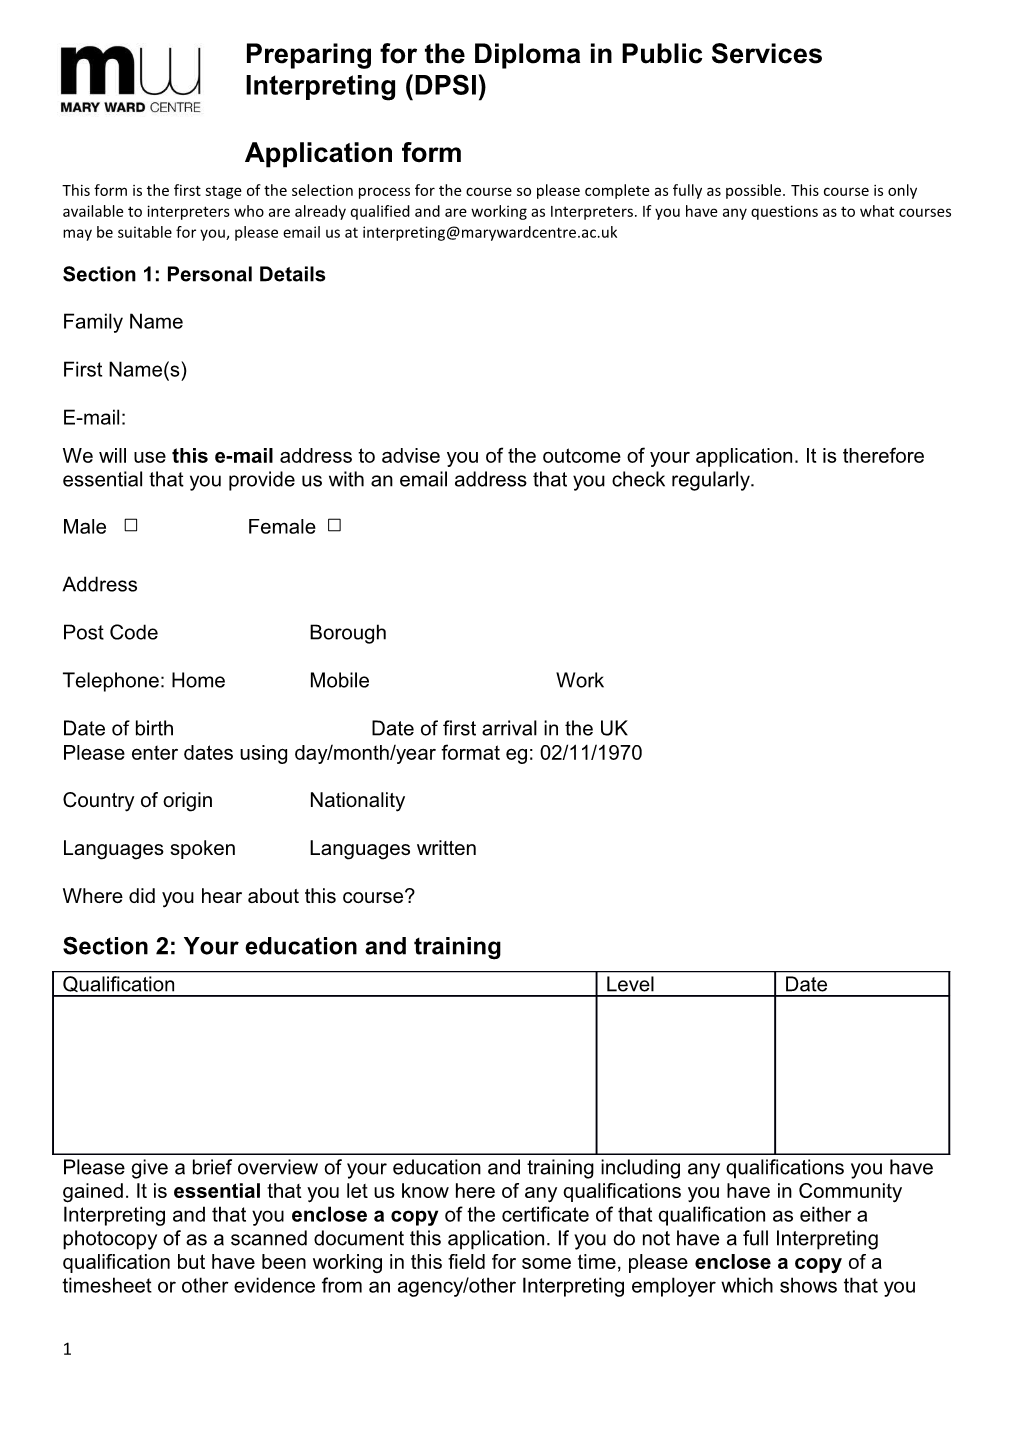 Application Form s90